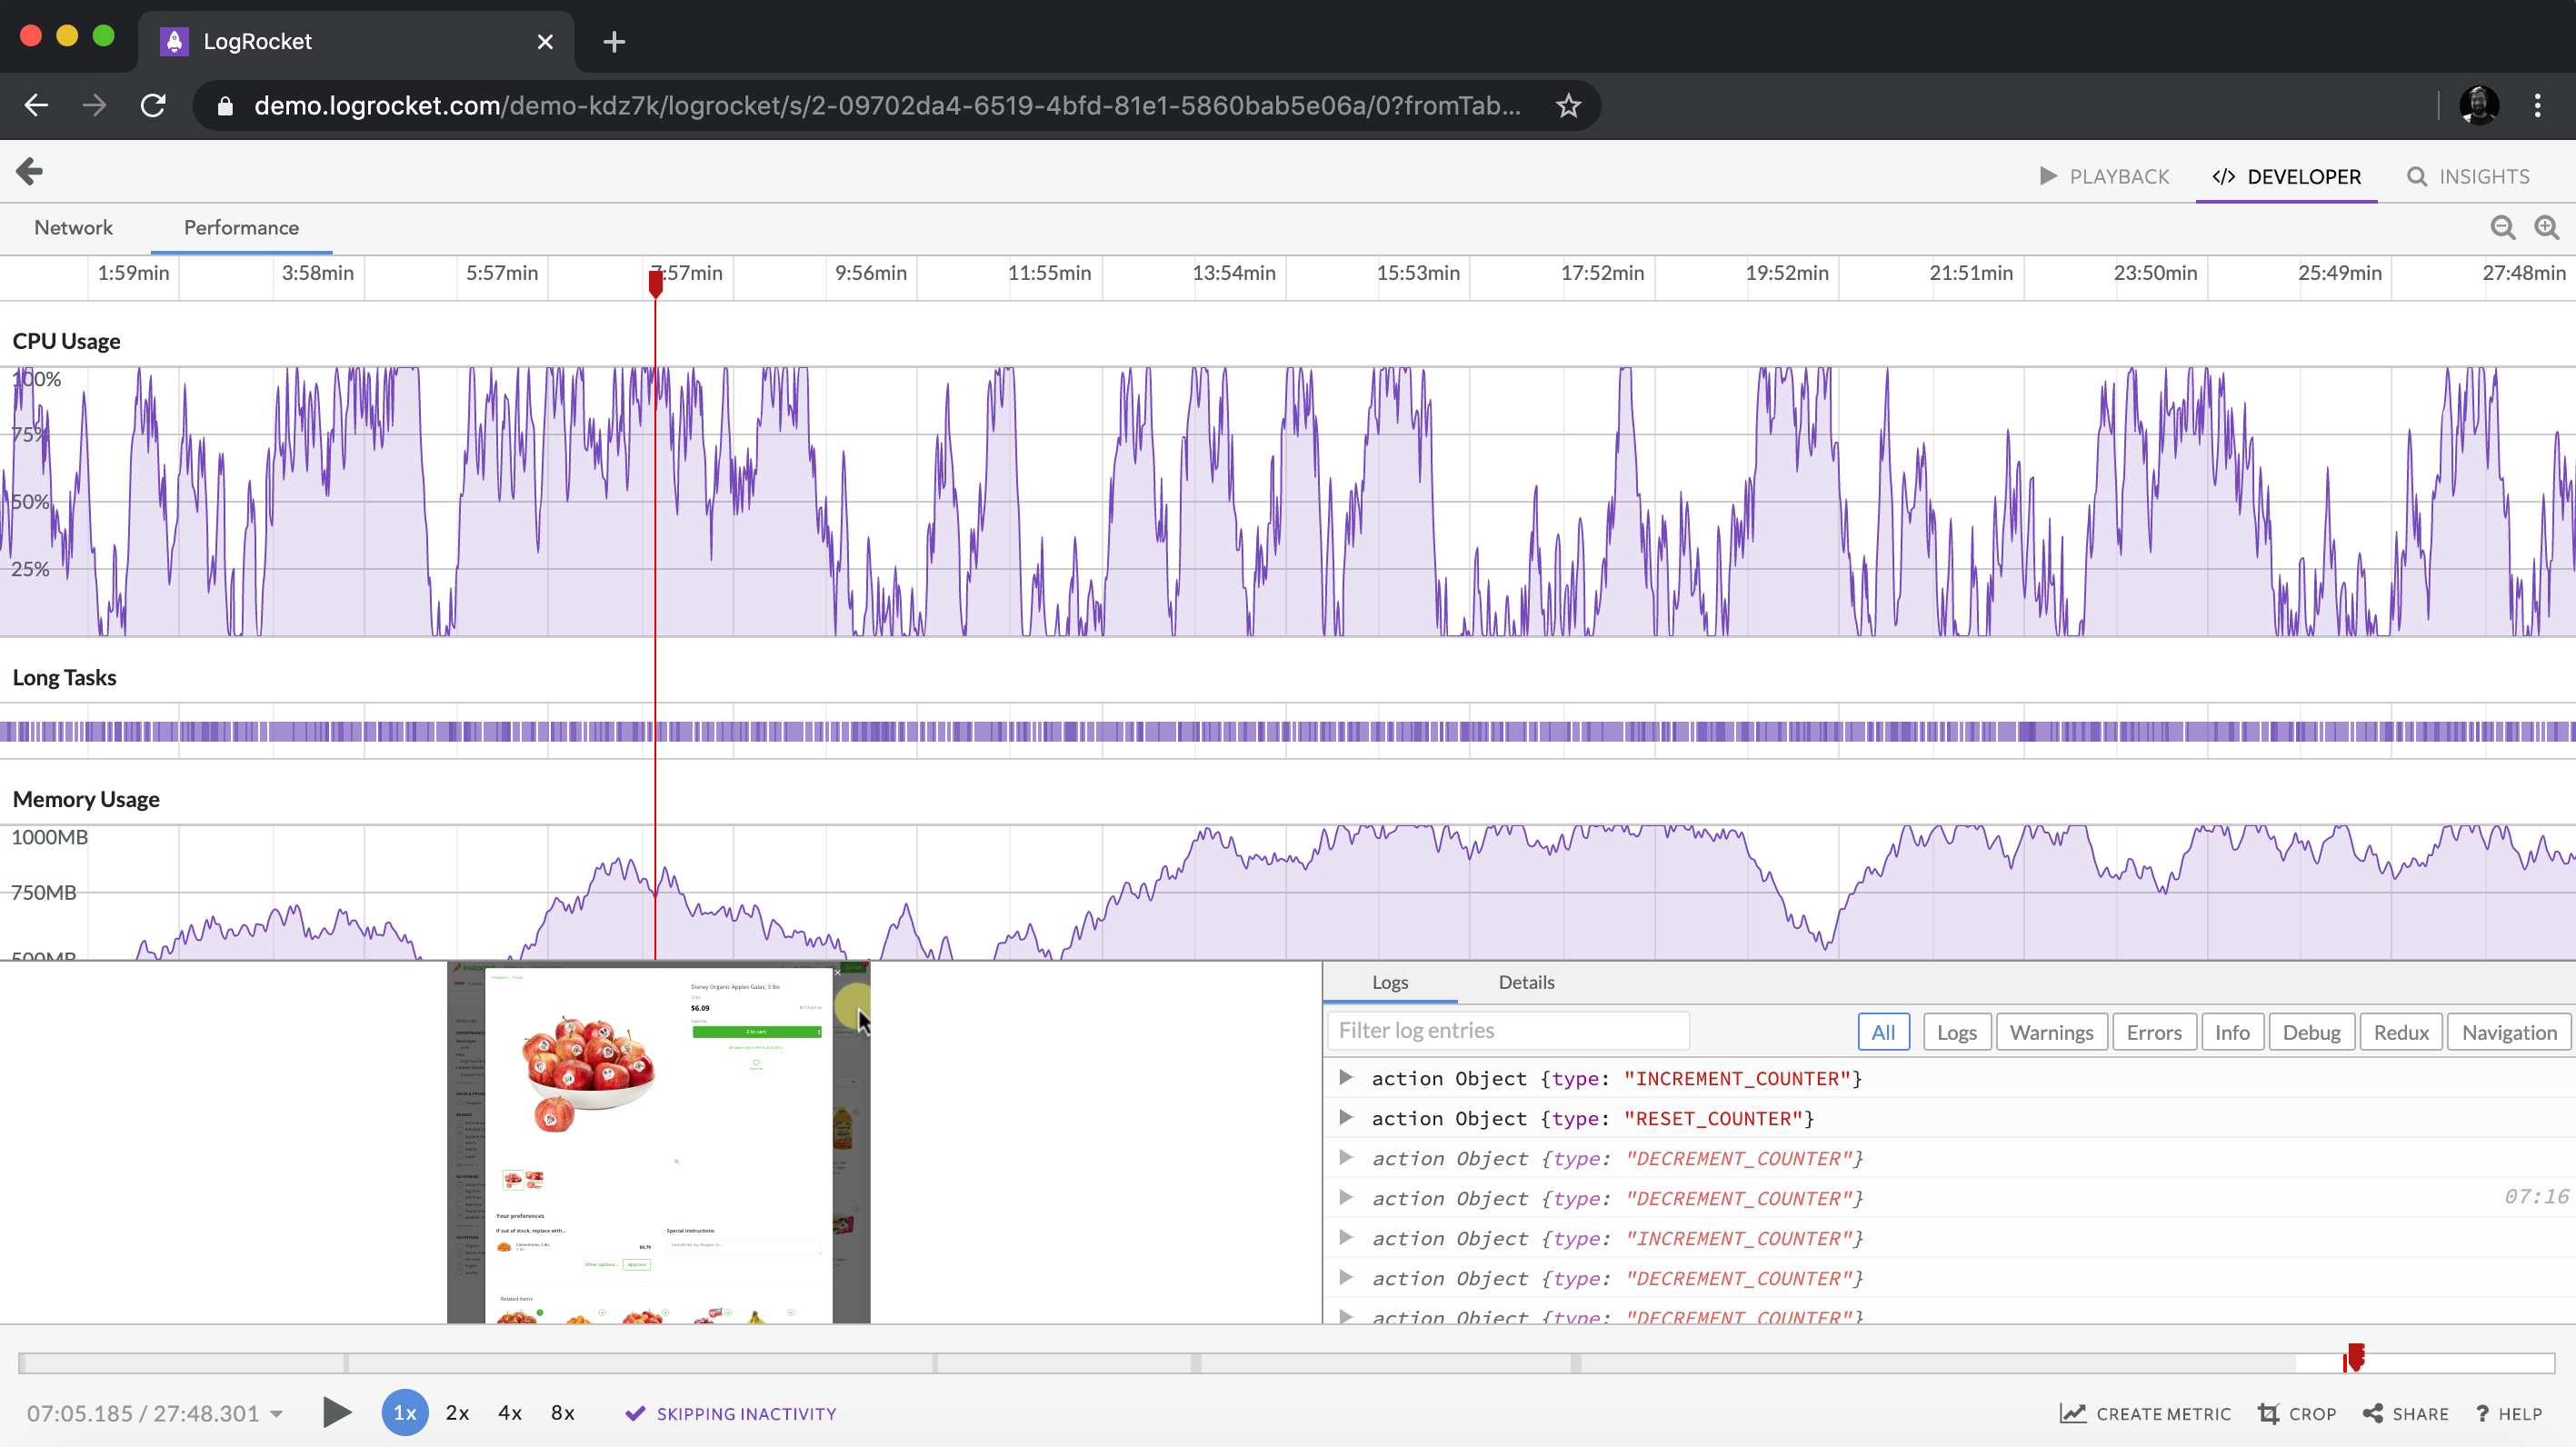 Performance Monitoring: in addition to aggregating performance metrics across all users, LogRocket can also monitor browser-based performance measures like CPU and memory usage.